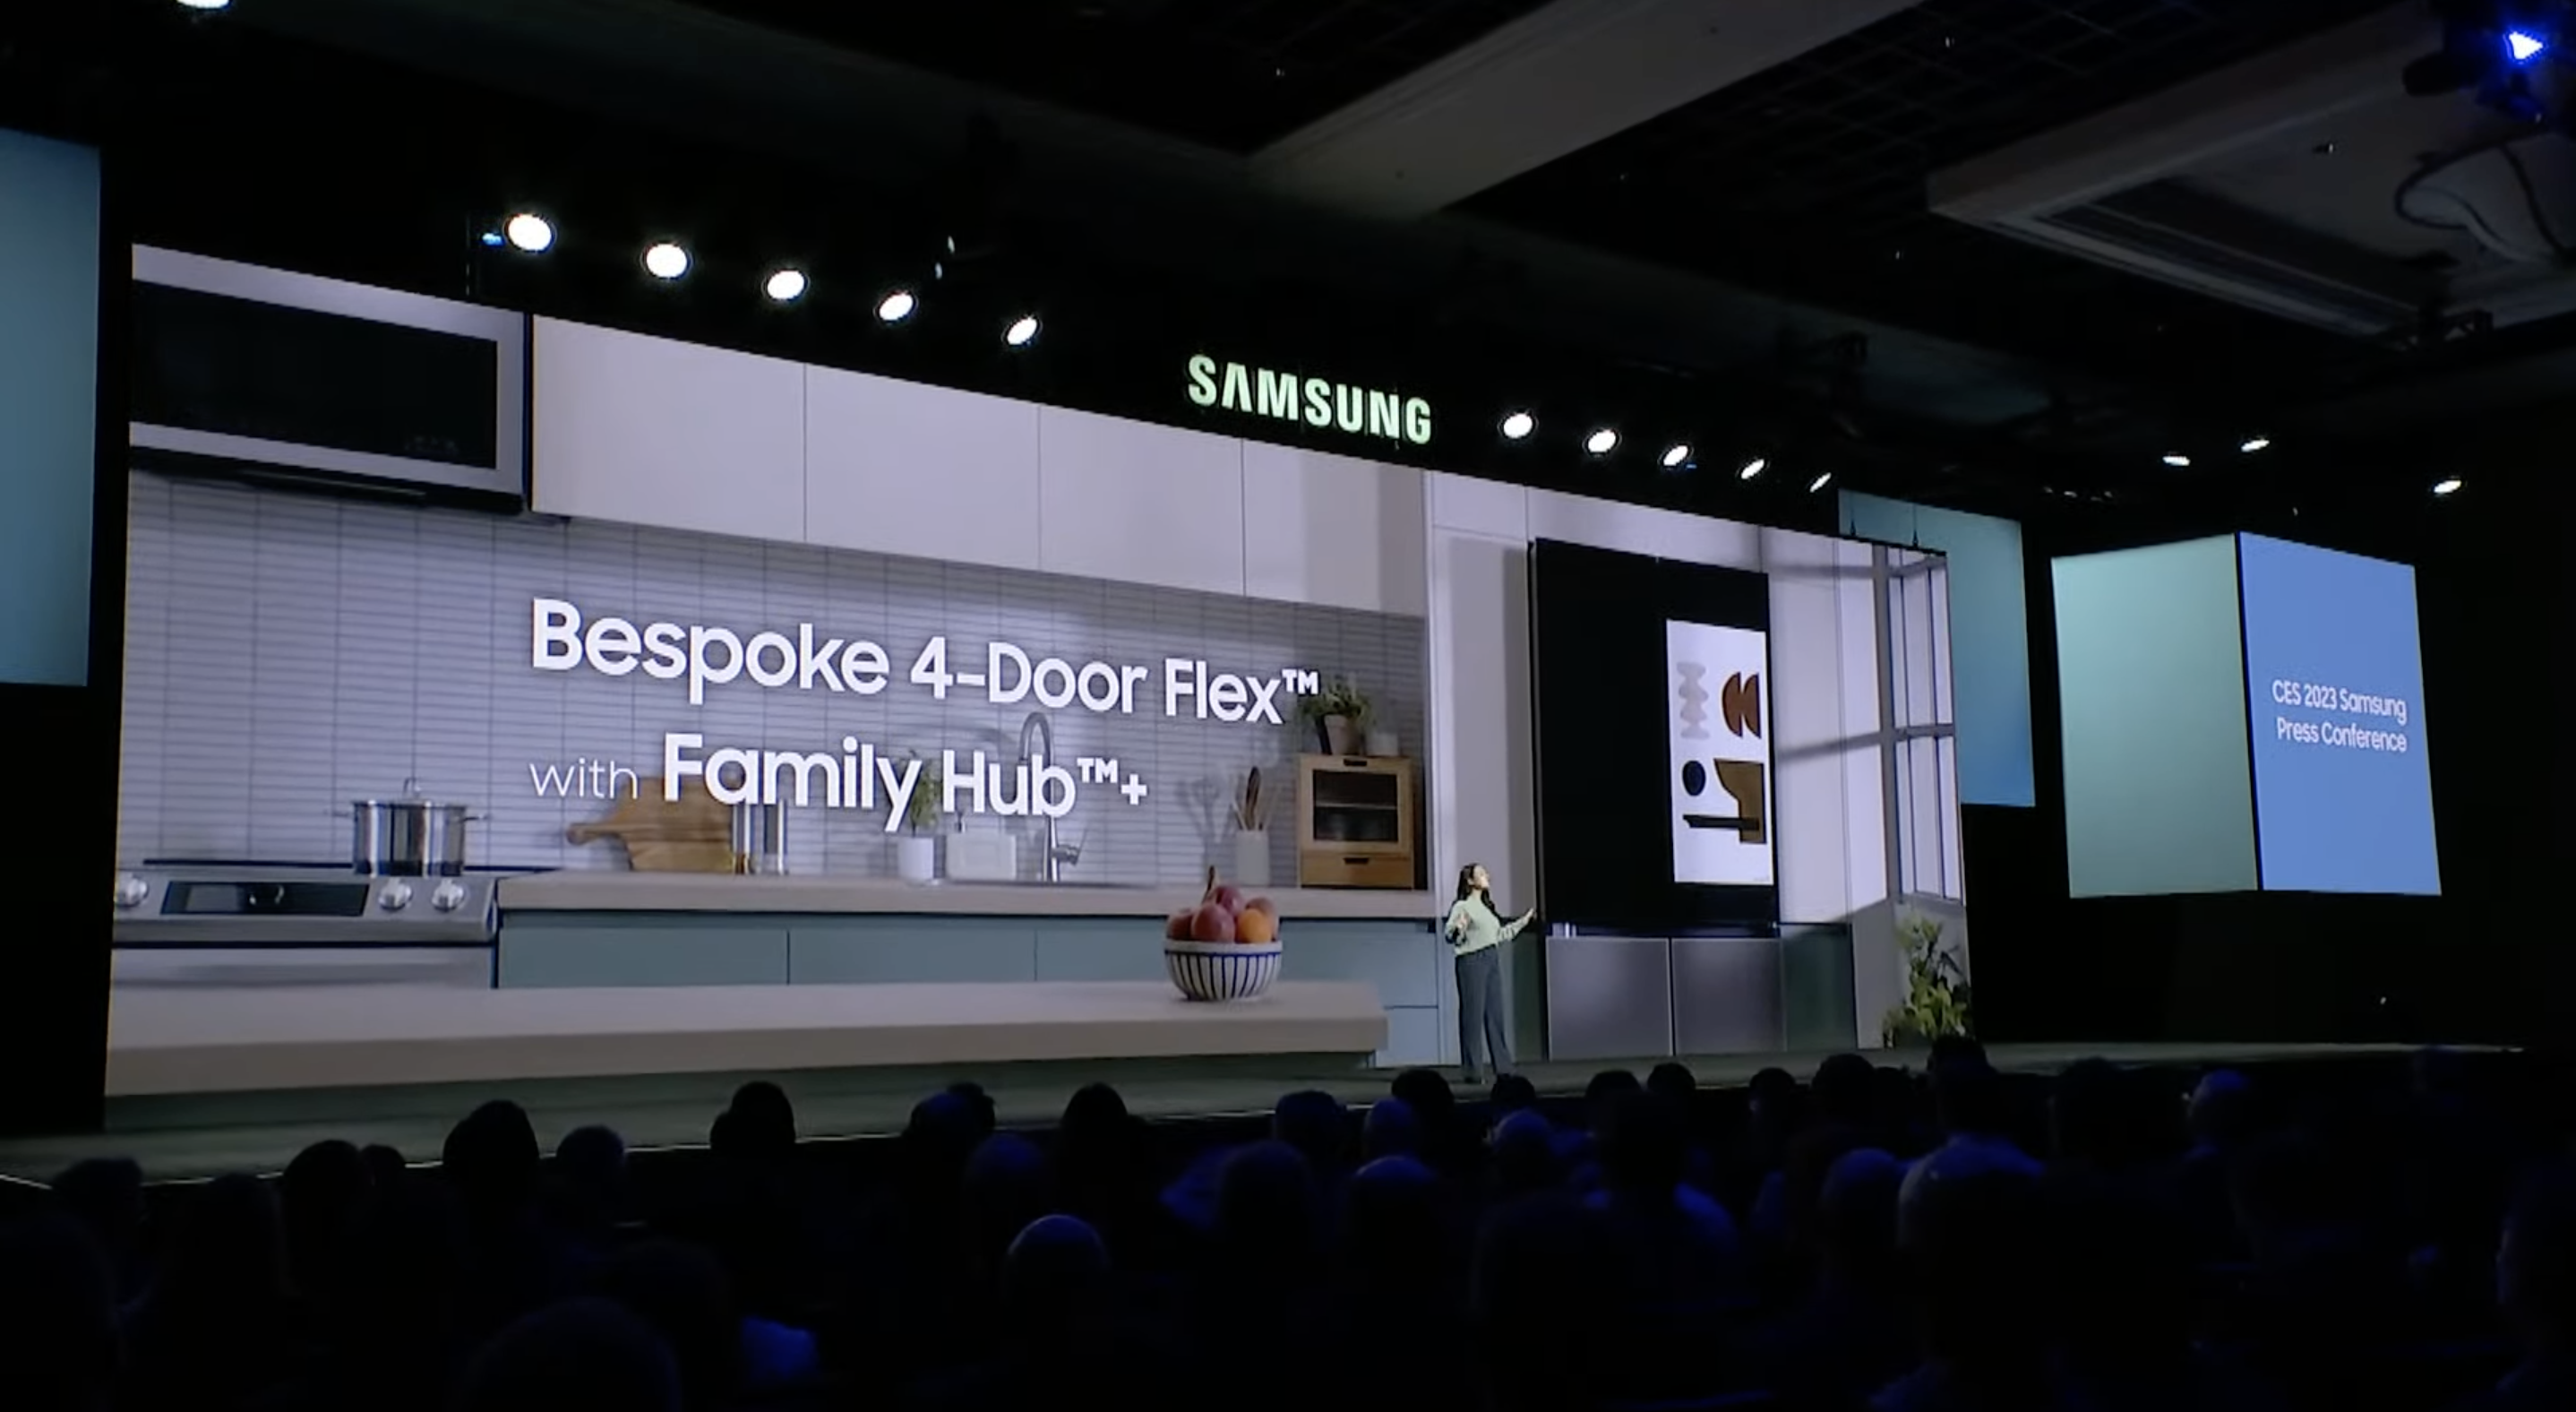 An image from Samsung's CES 2023 keynote